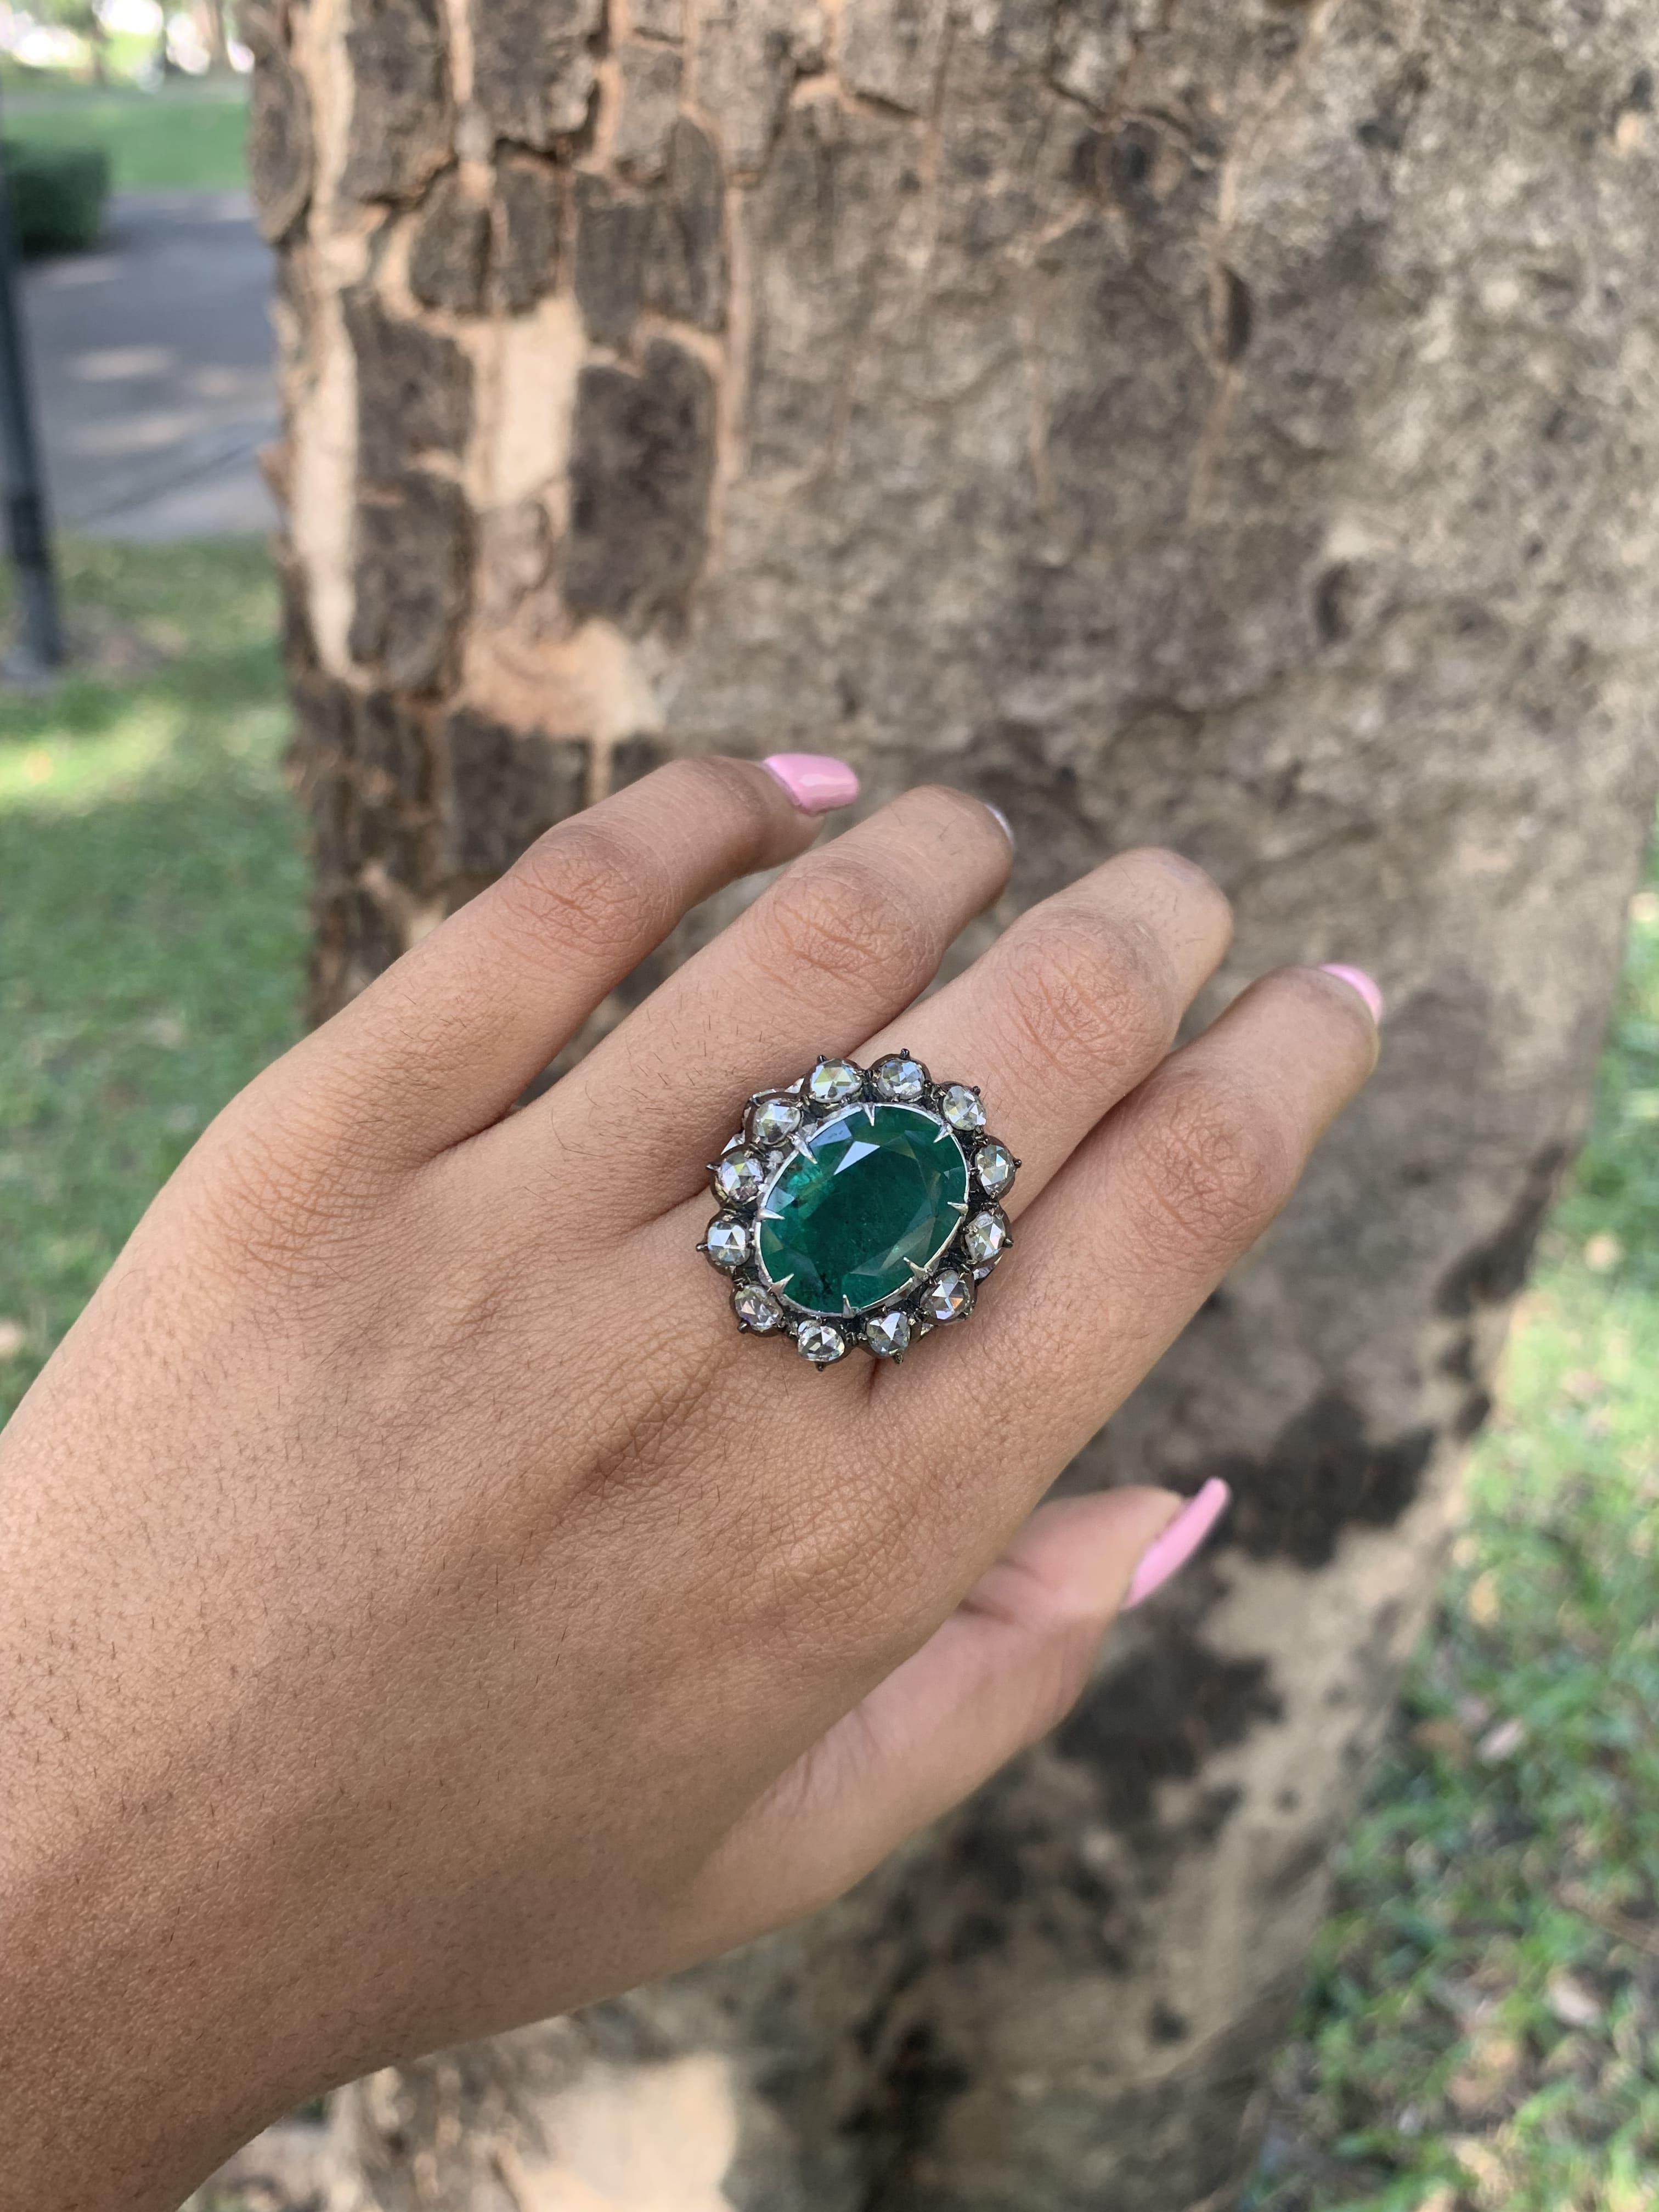  8.9 Ct Zambian Emerald Art Deco Ring with Rose Cut Diamonds in 14K White Gold For Sale 4